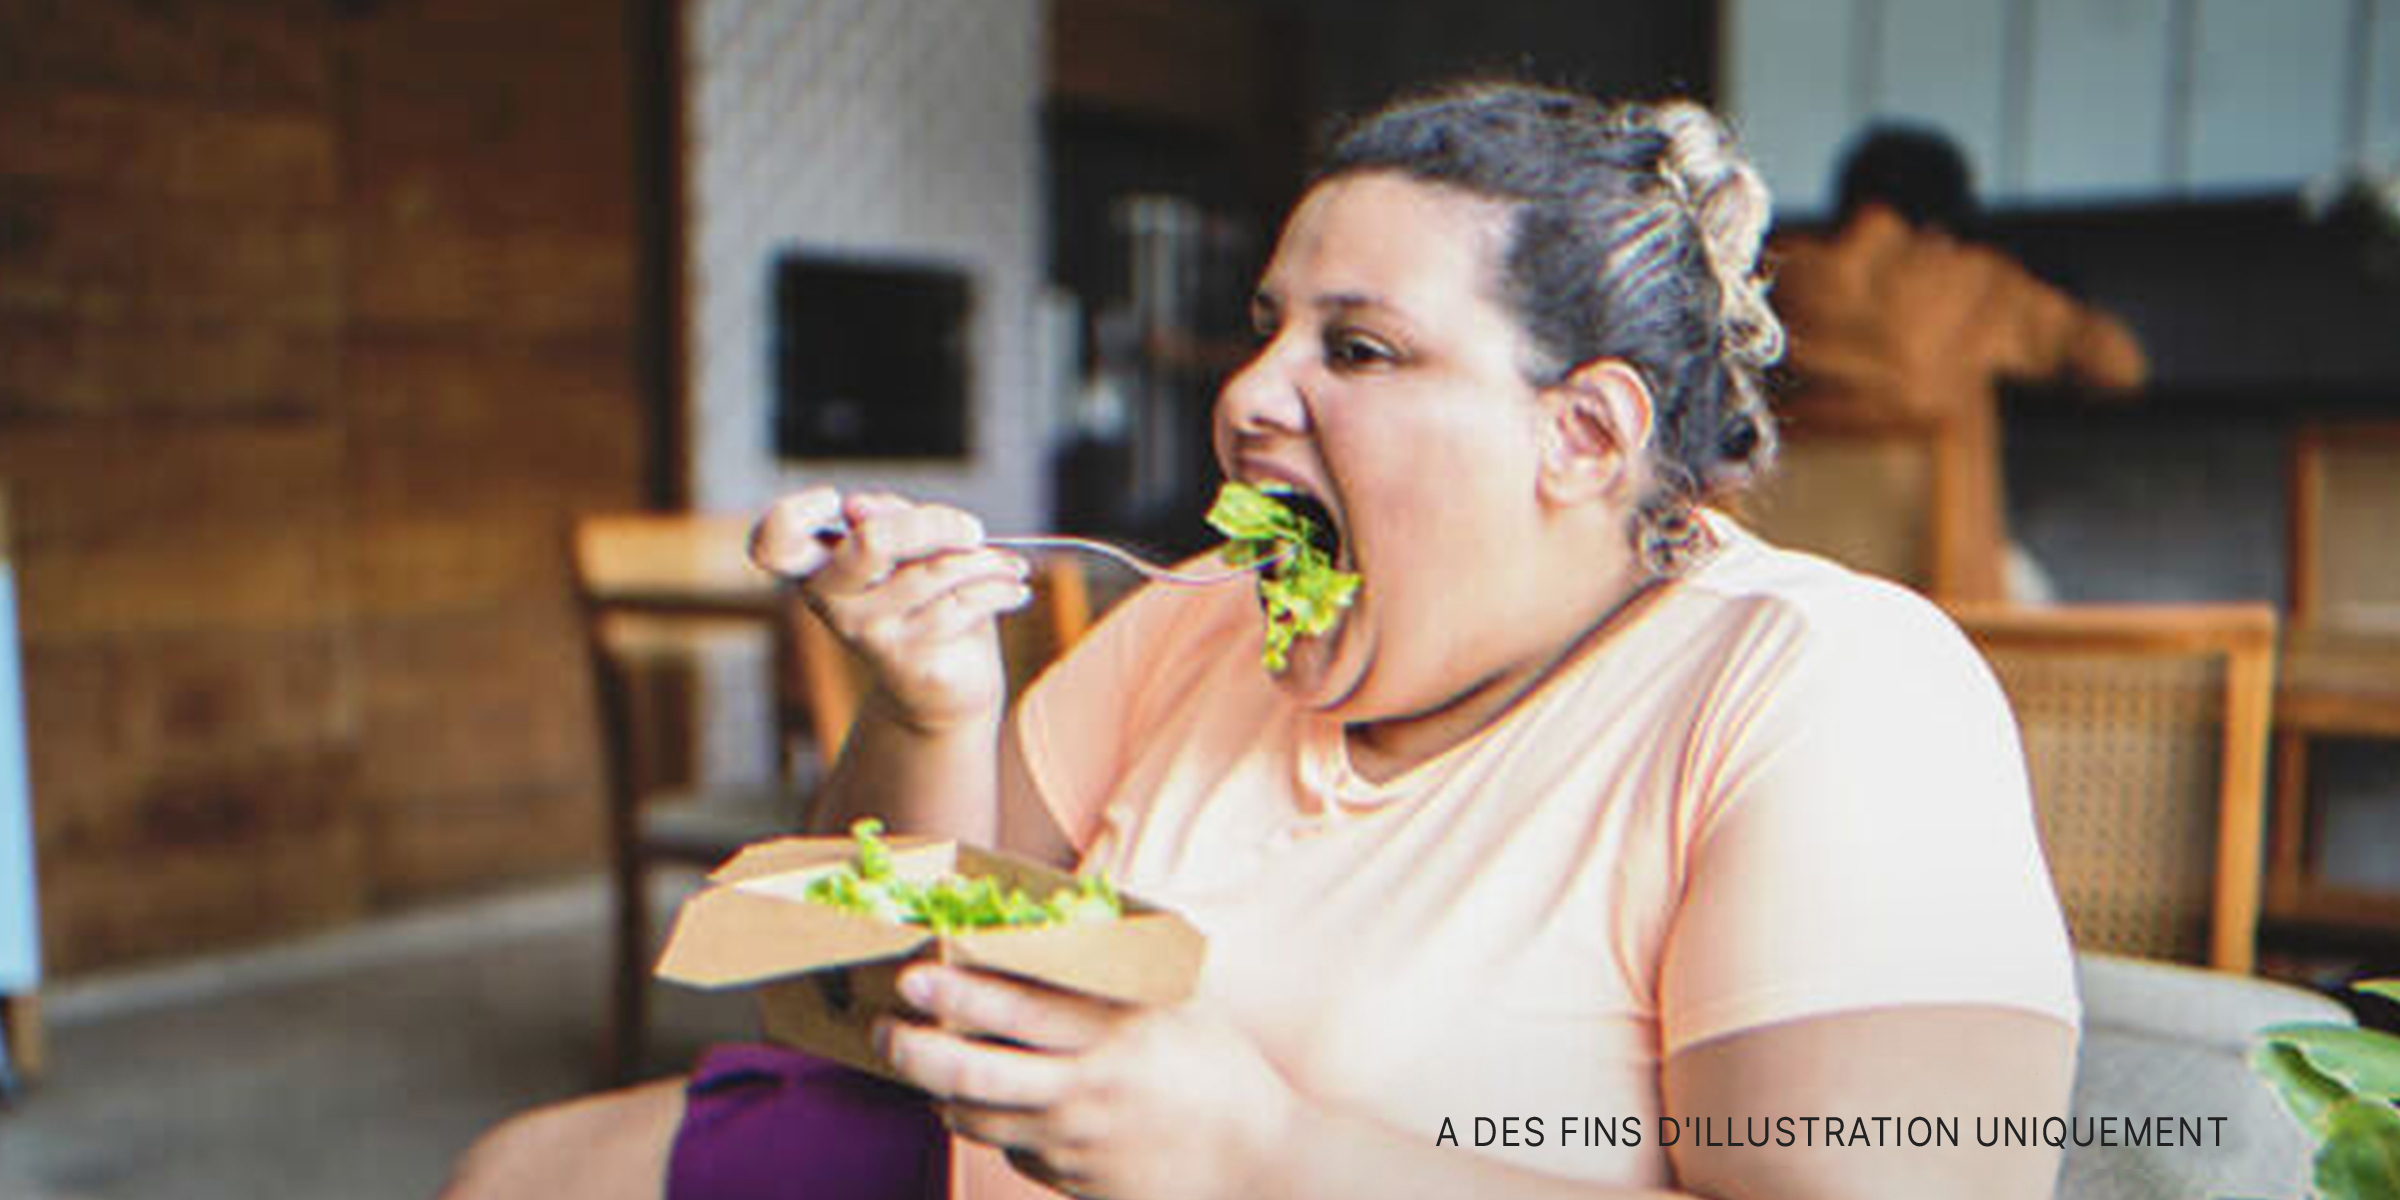 Une femme ronde mangeant une salade | Source : Getty Images